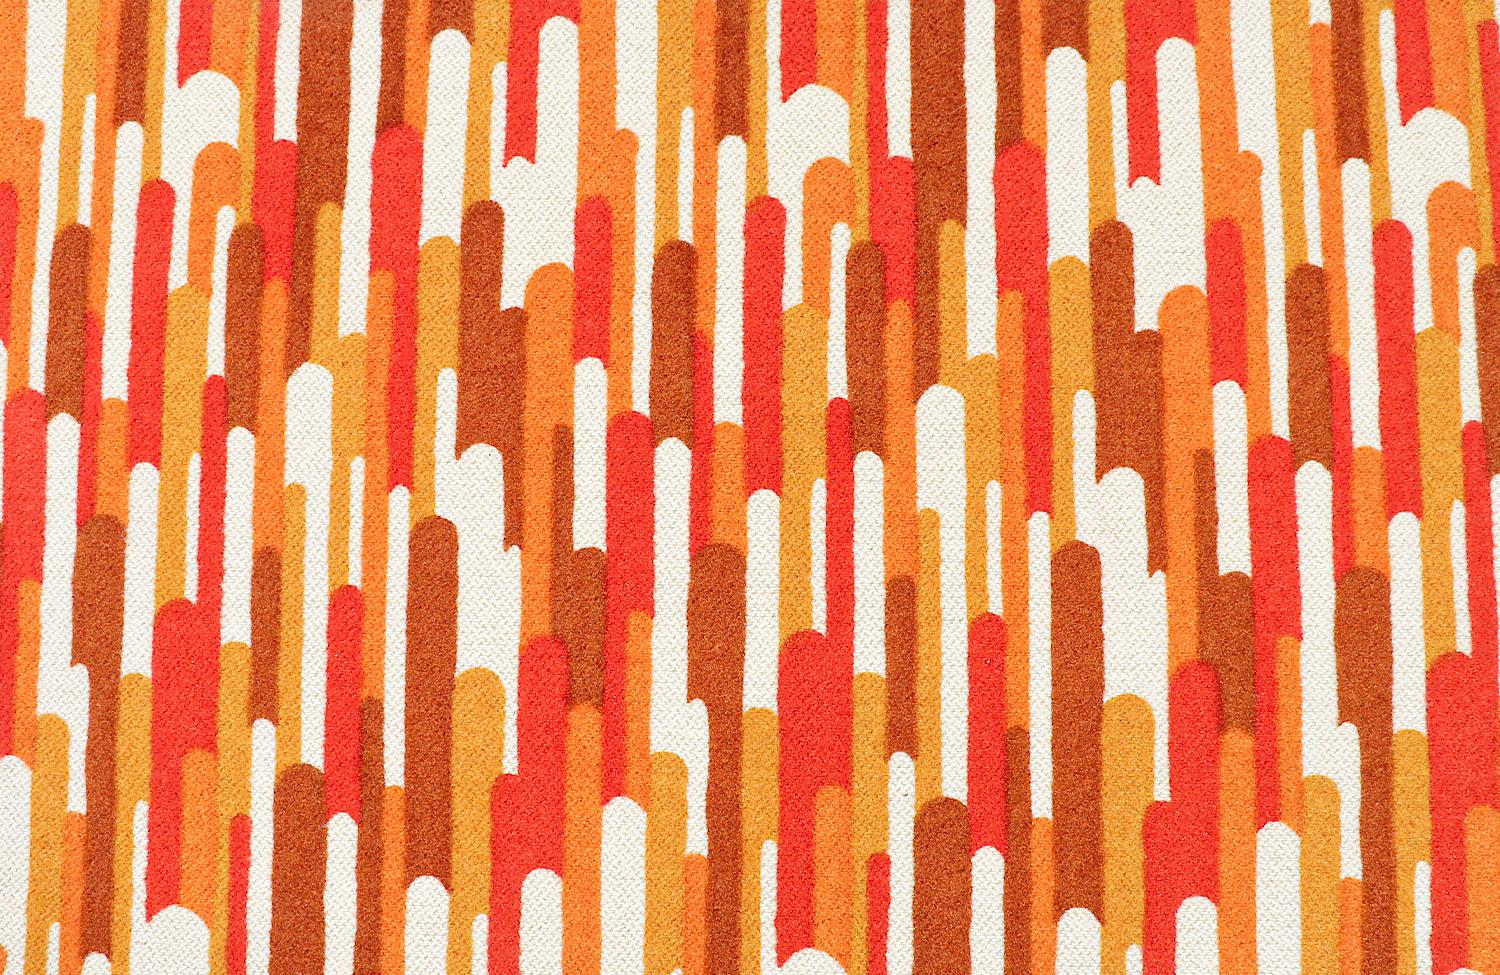 Fabric Mid-Century Modern Graphic Textile Wall Art For Sale